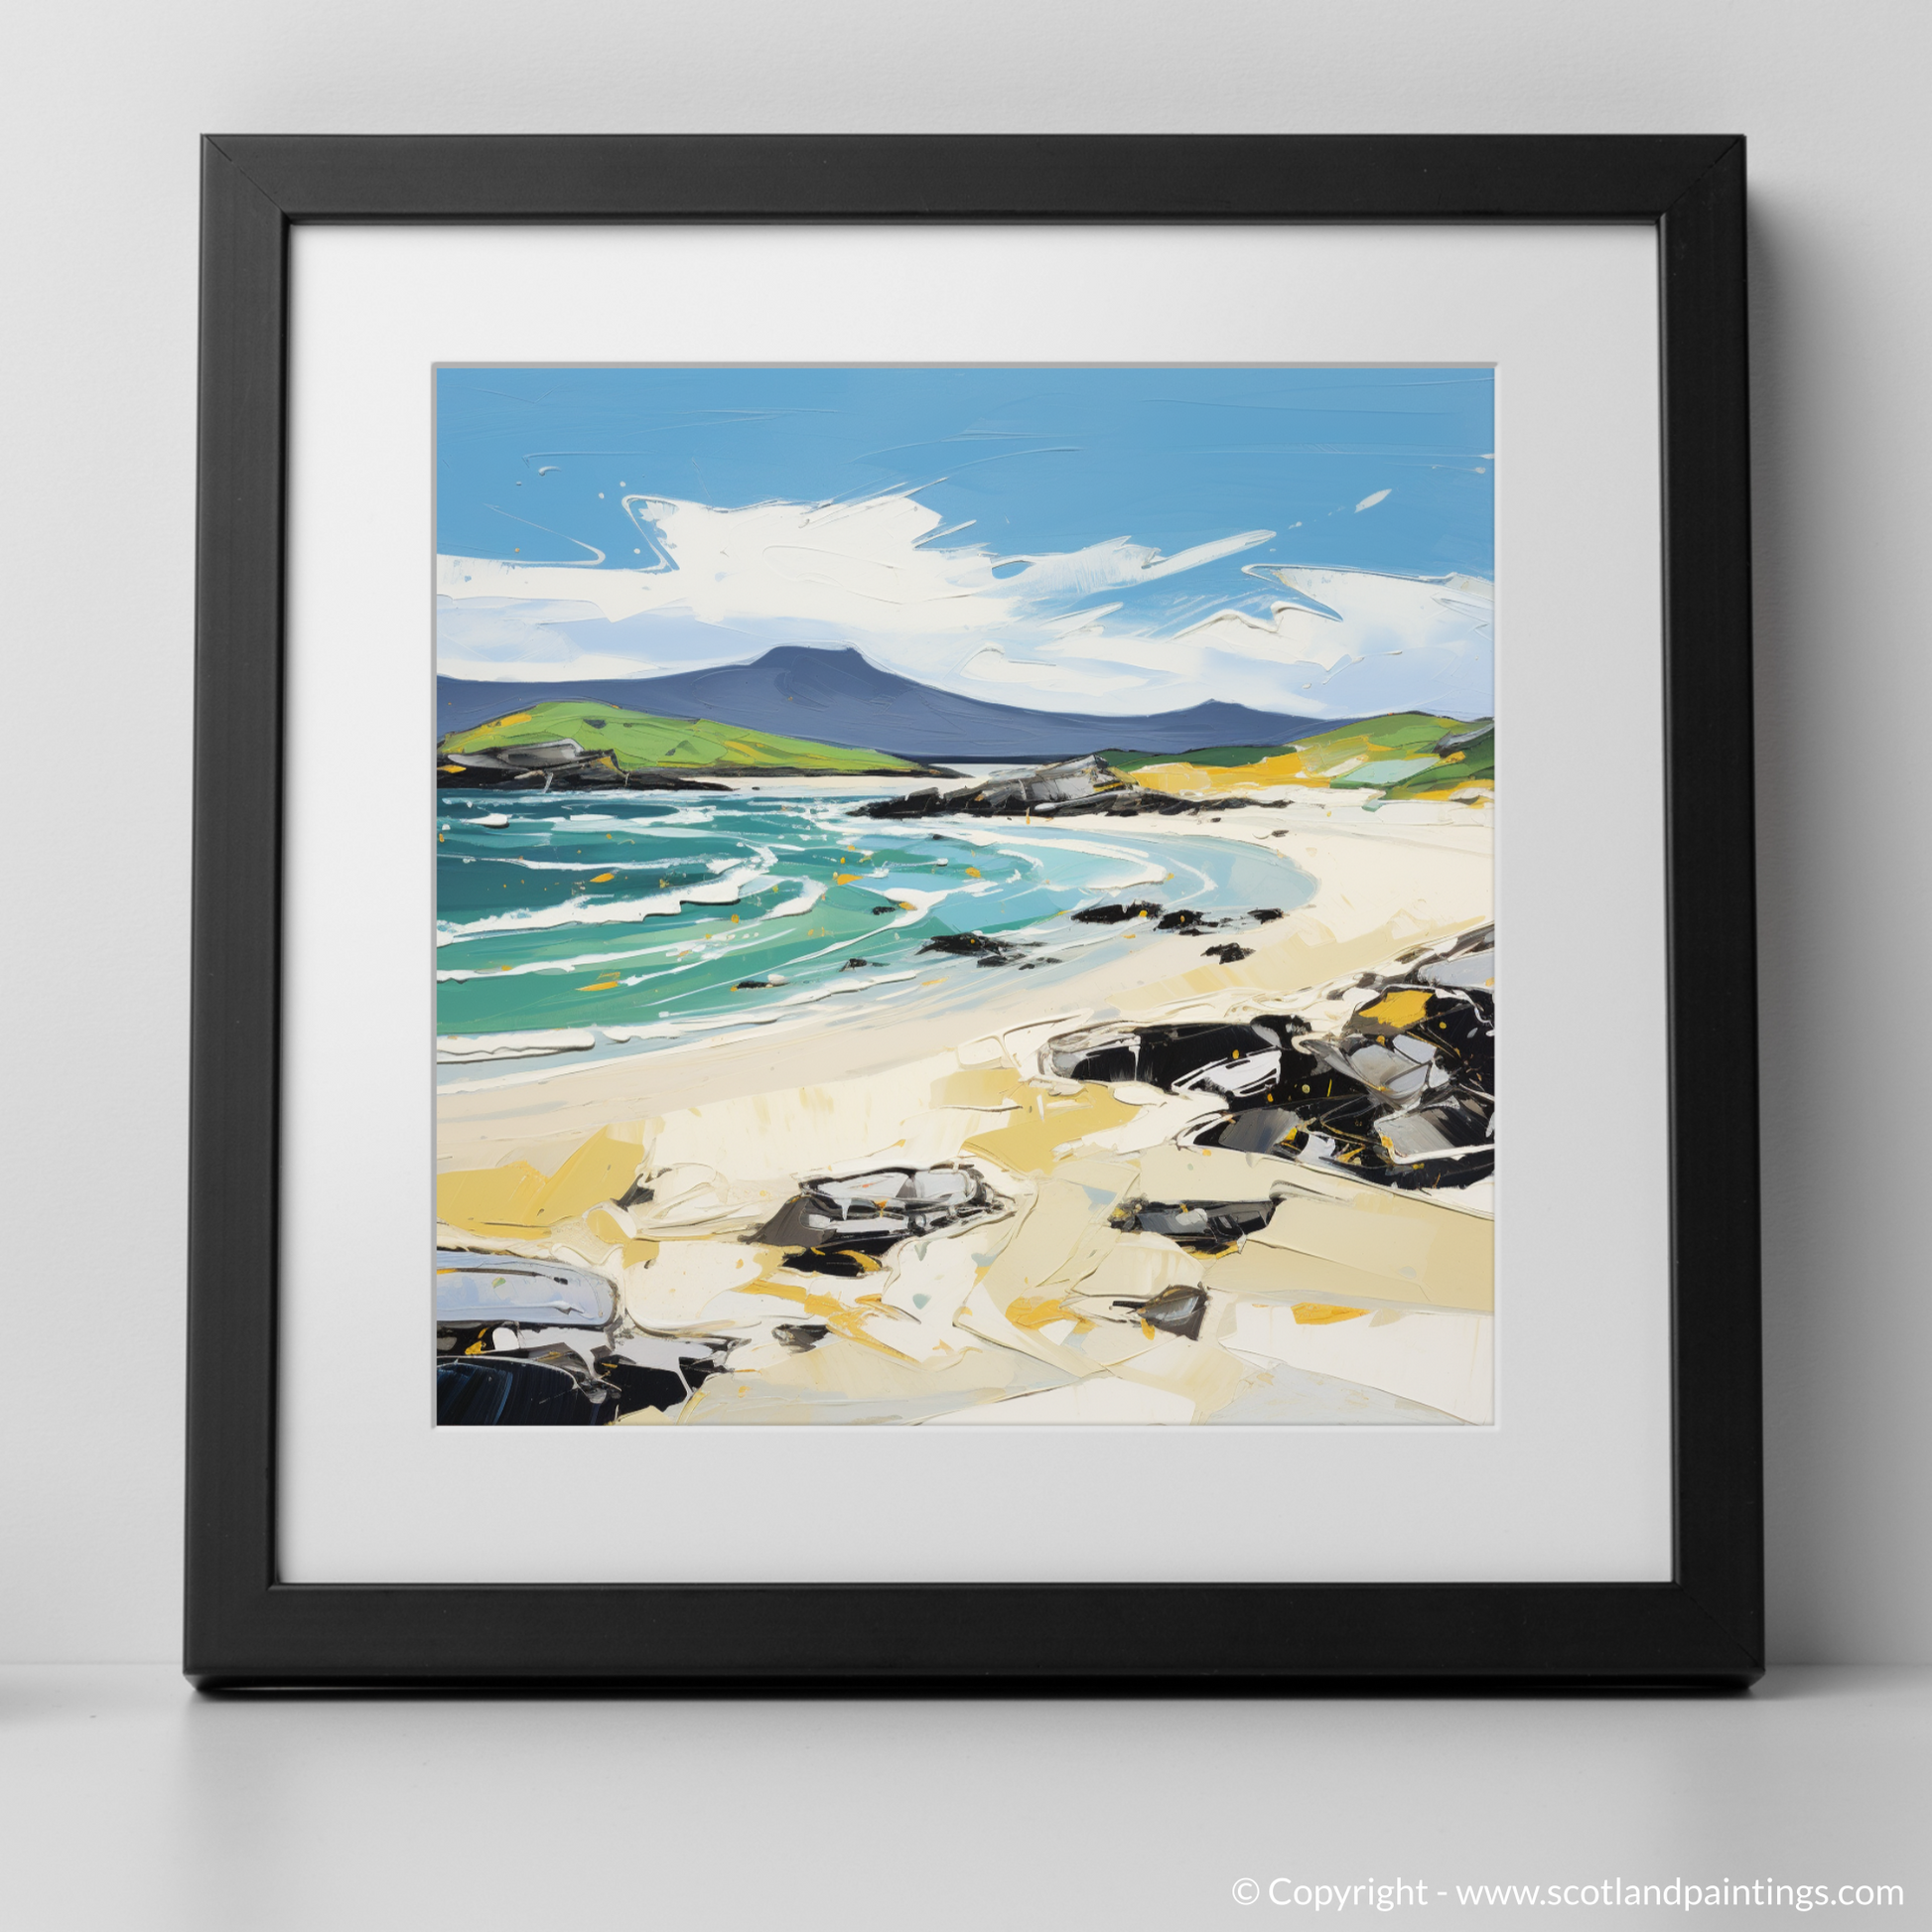 Art Print of Scarista Beach, Isle of Harris in summer with a black frame